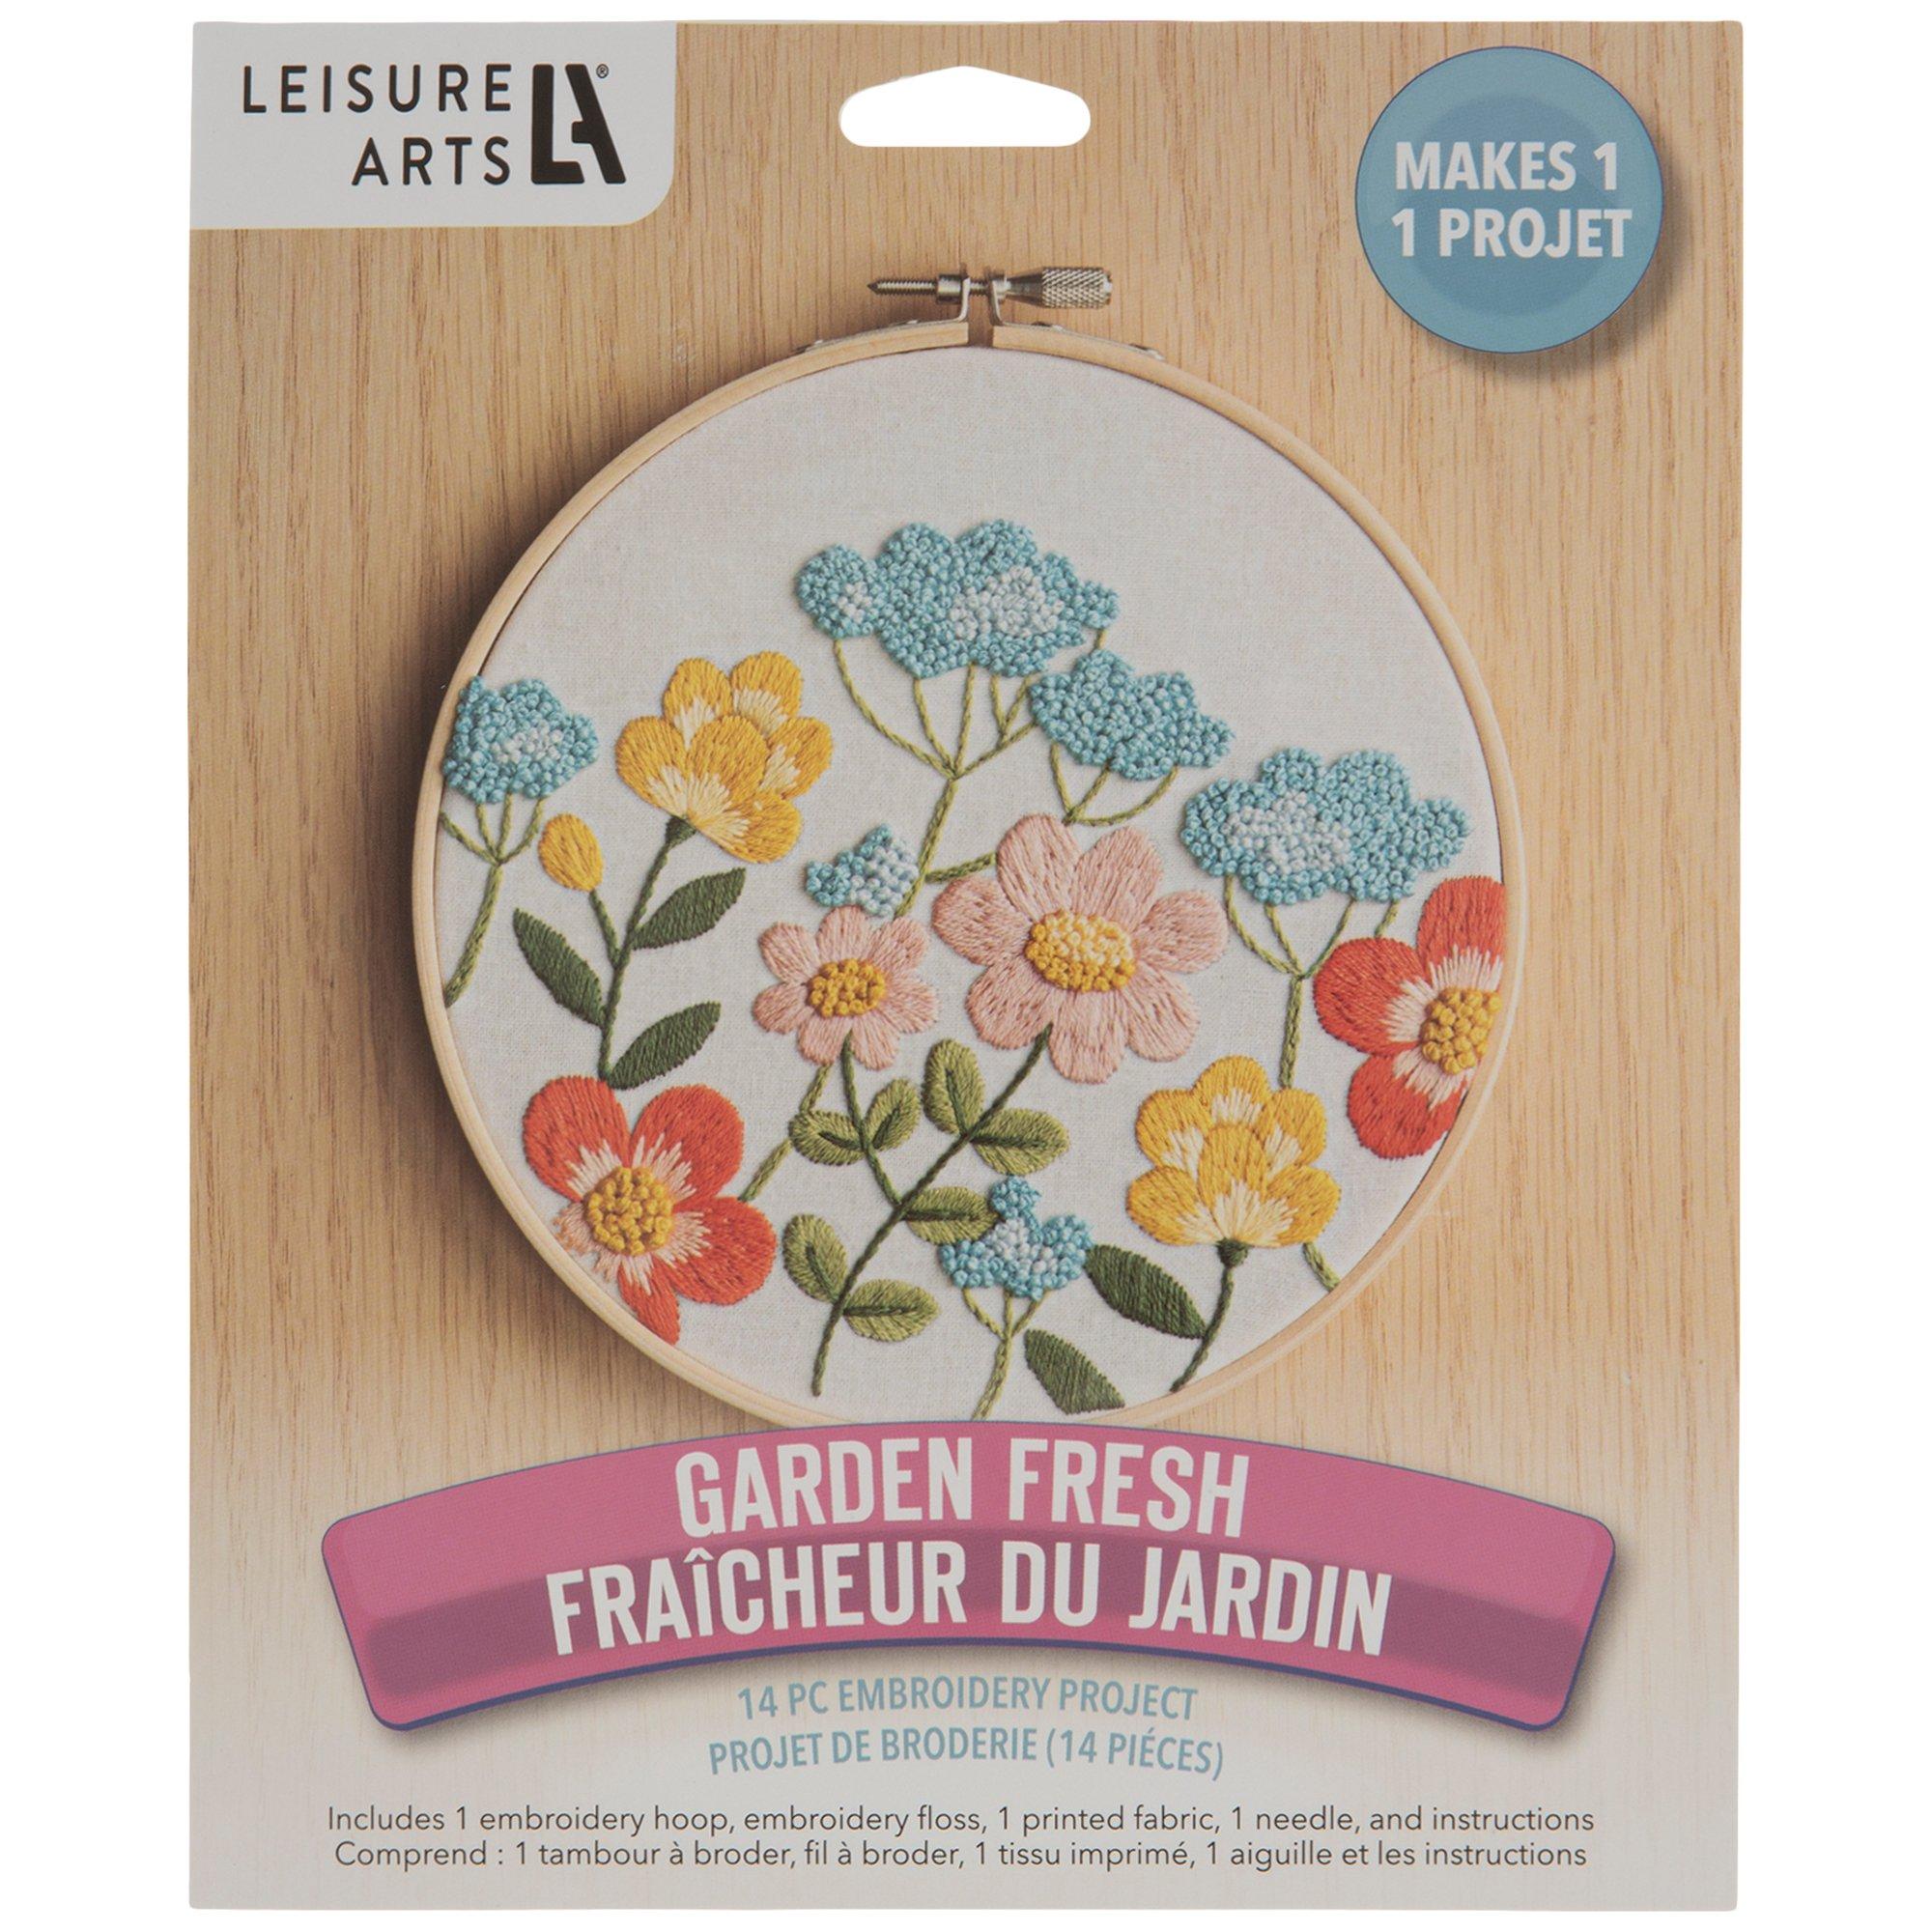 Leisure Arts Embroidery Kit 6 Yellow & Blue Flowers - embroidery kit for  beginners - embroidery kit for adults - cross stitch kits - cross stitch  kits for beginners - embroidery patterns